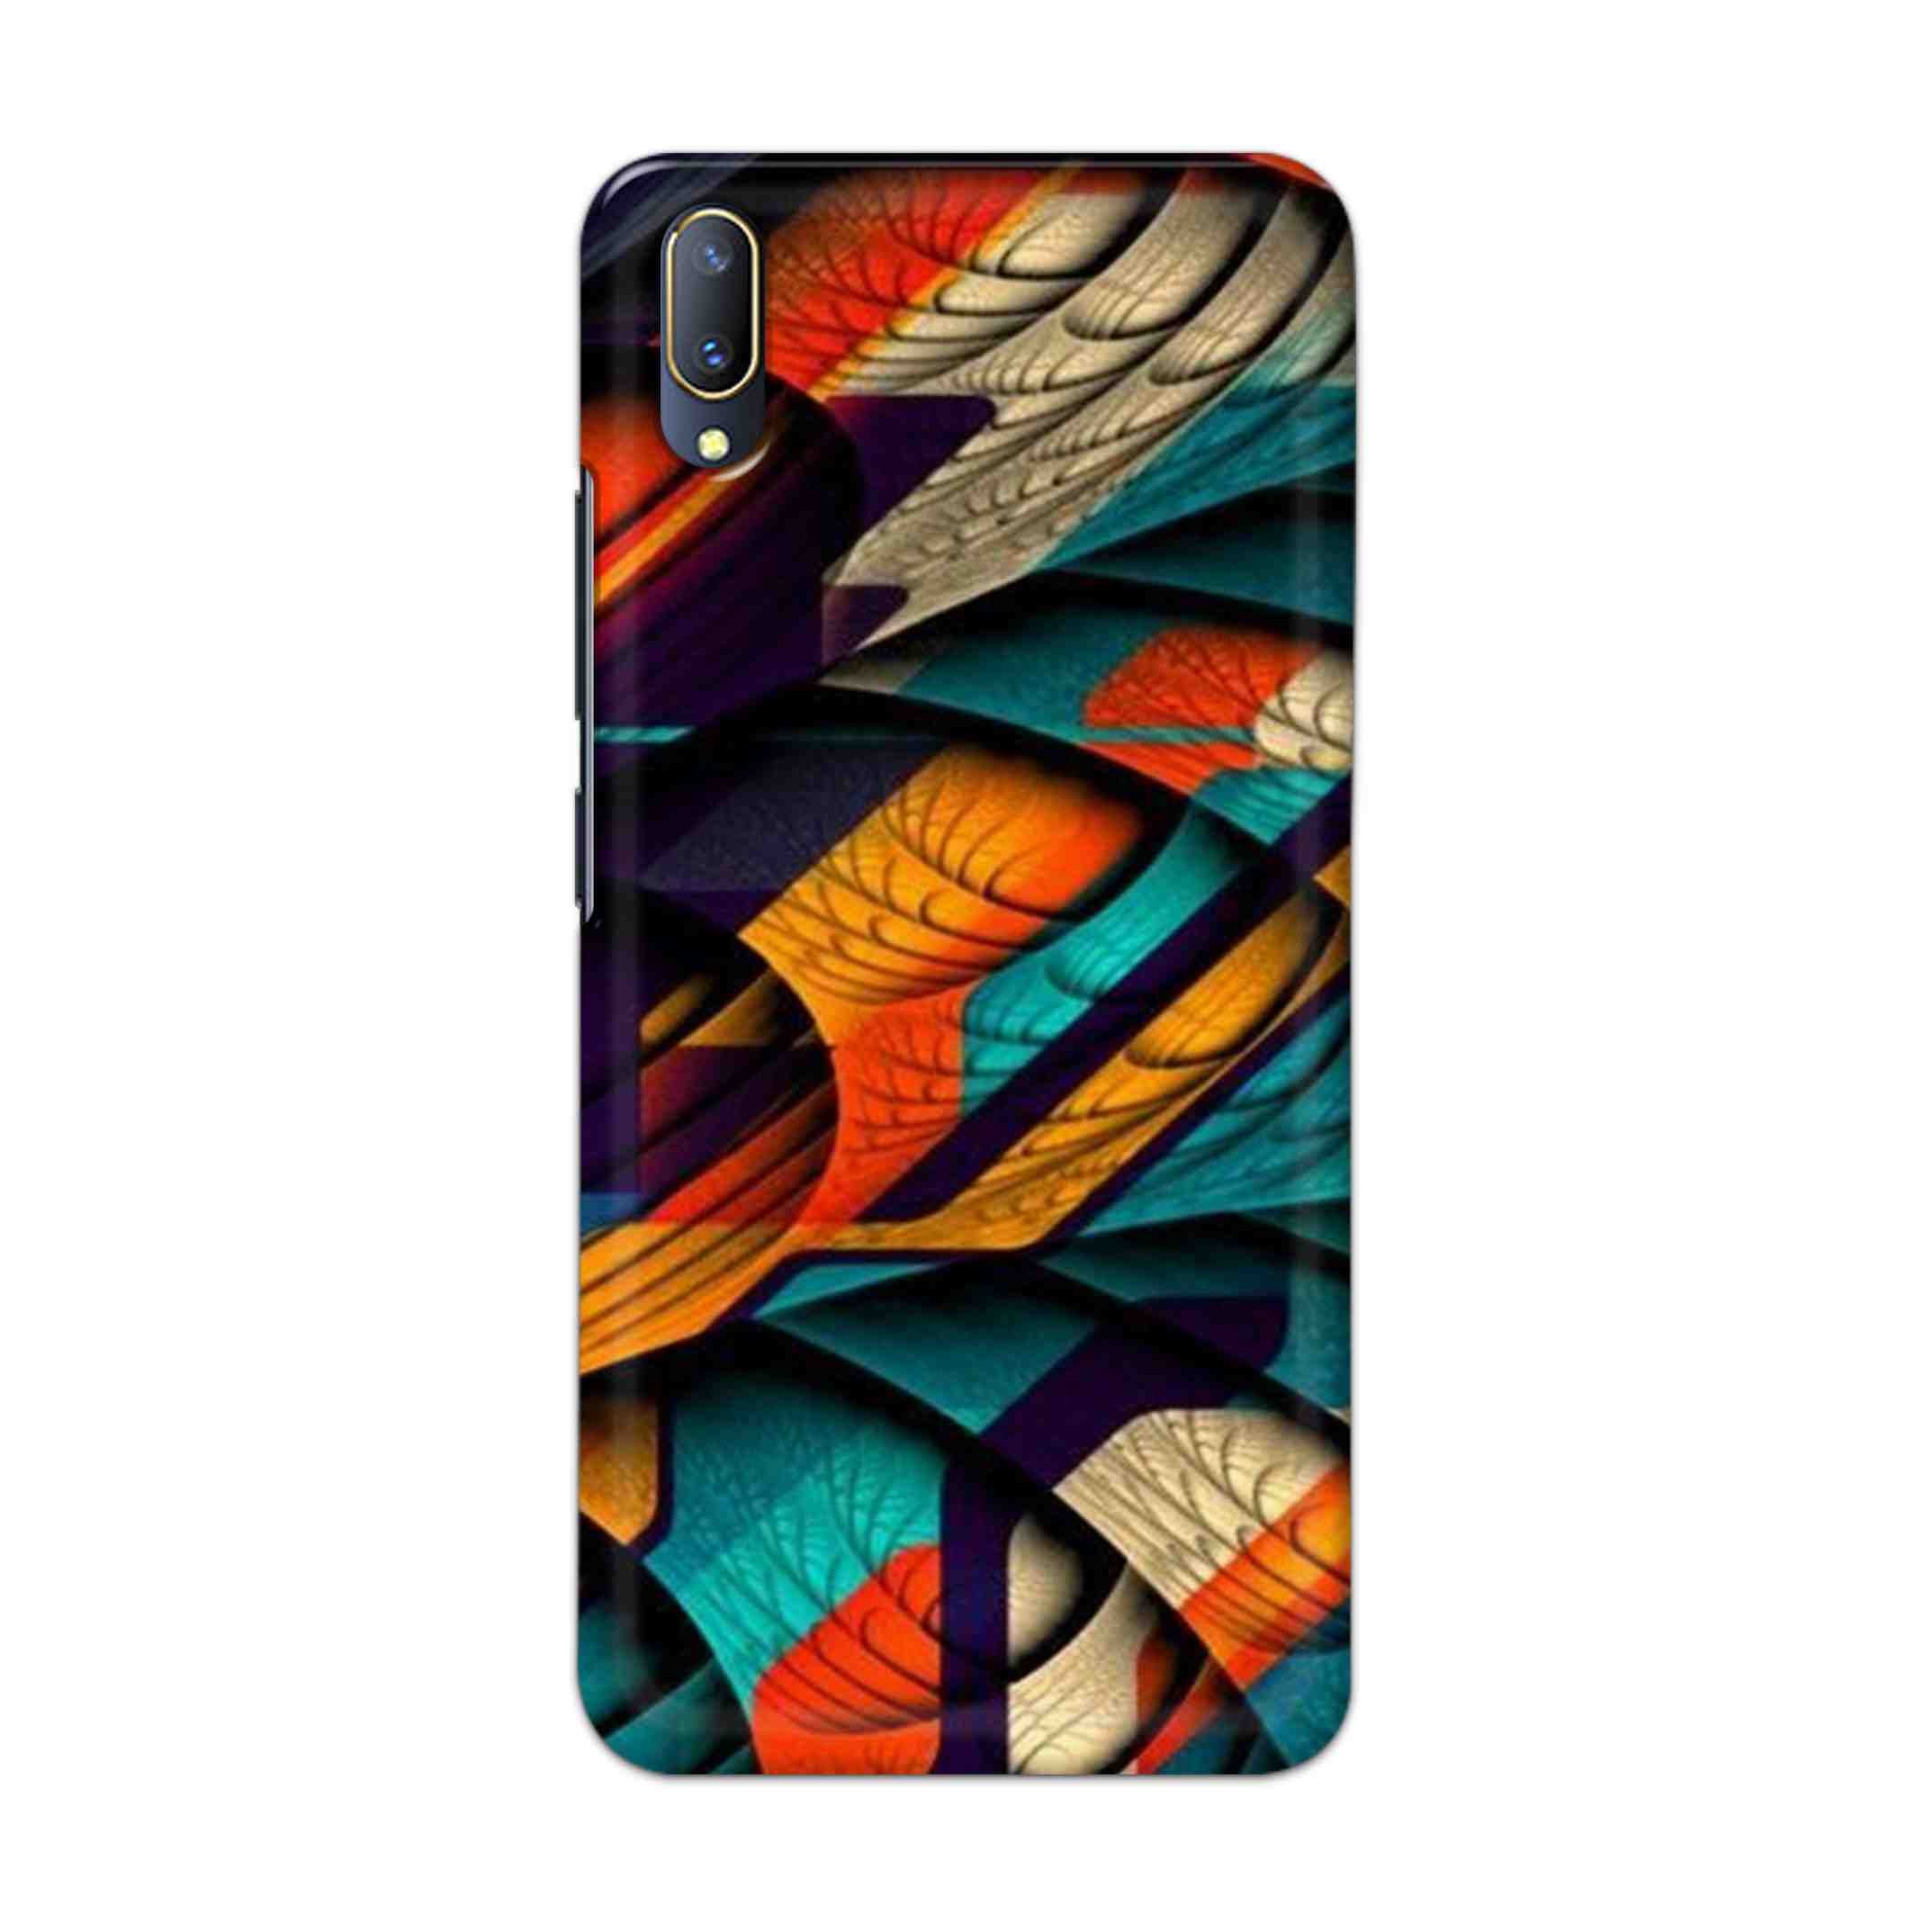 Buy Colour Abstract Hard Back Mobile Phone Case Cover For V11 PRO Online